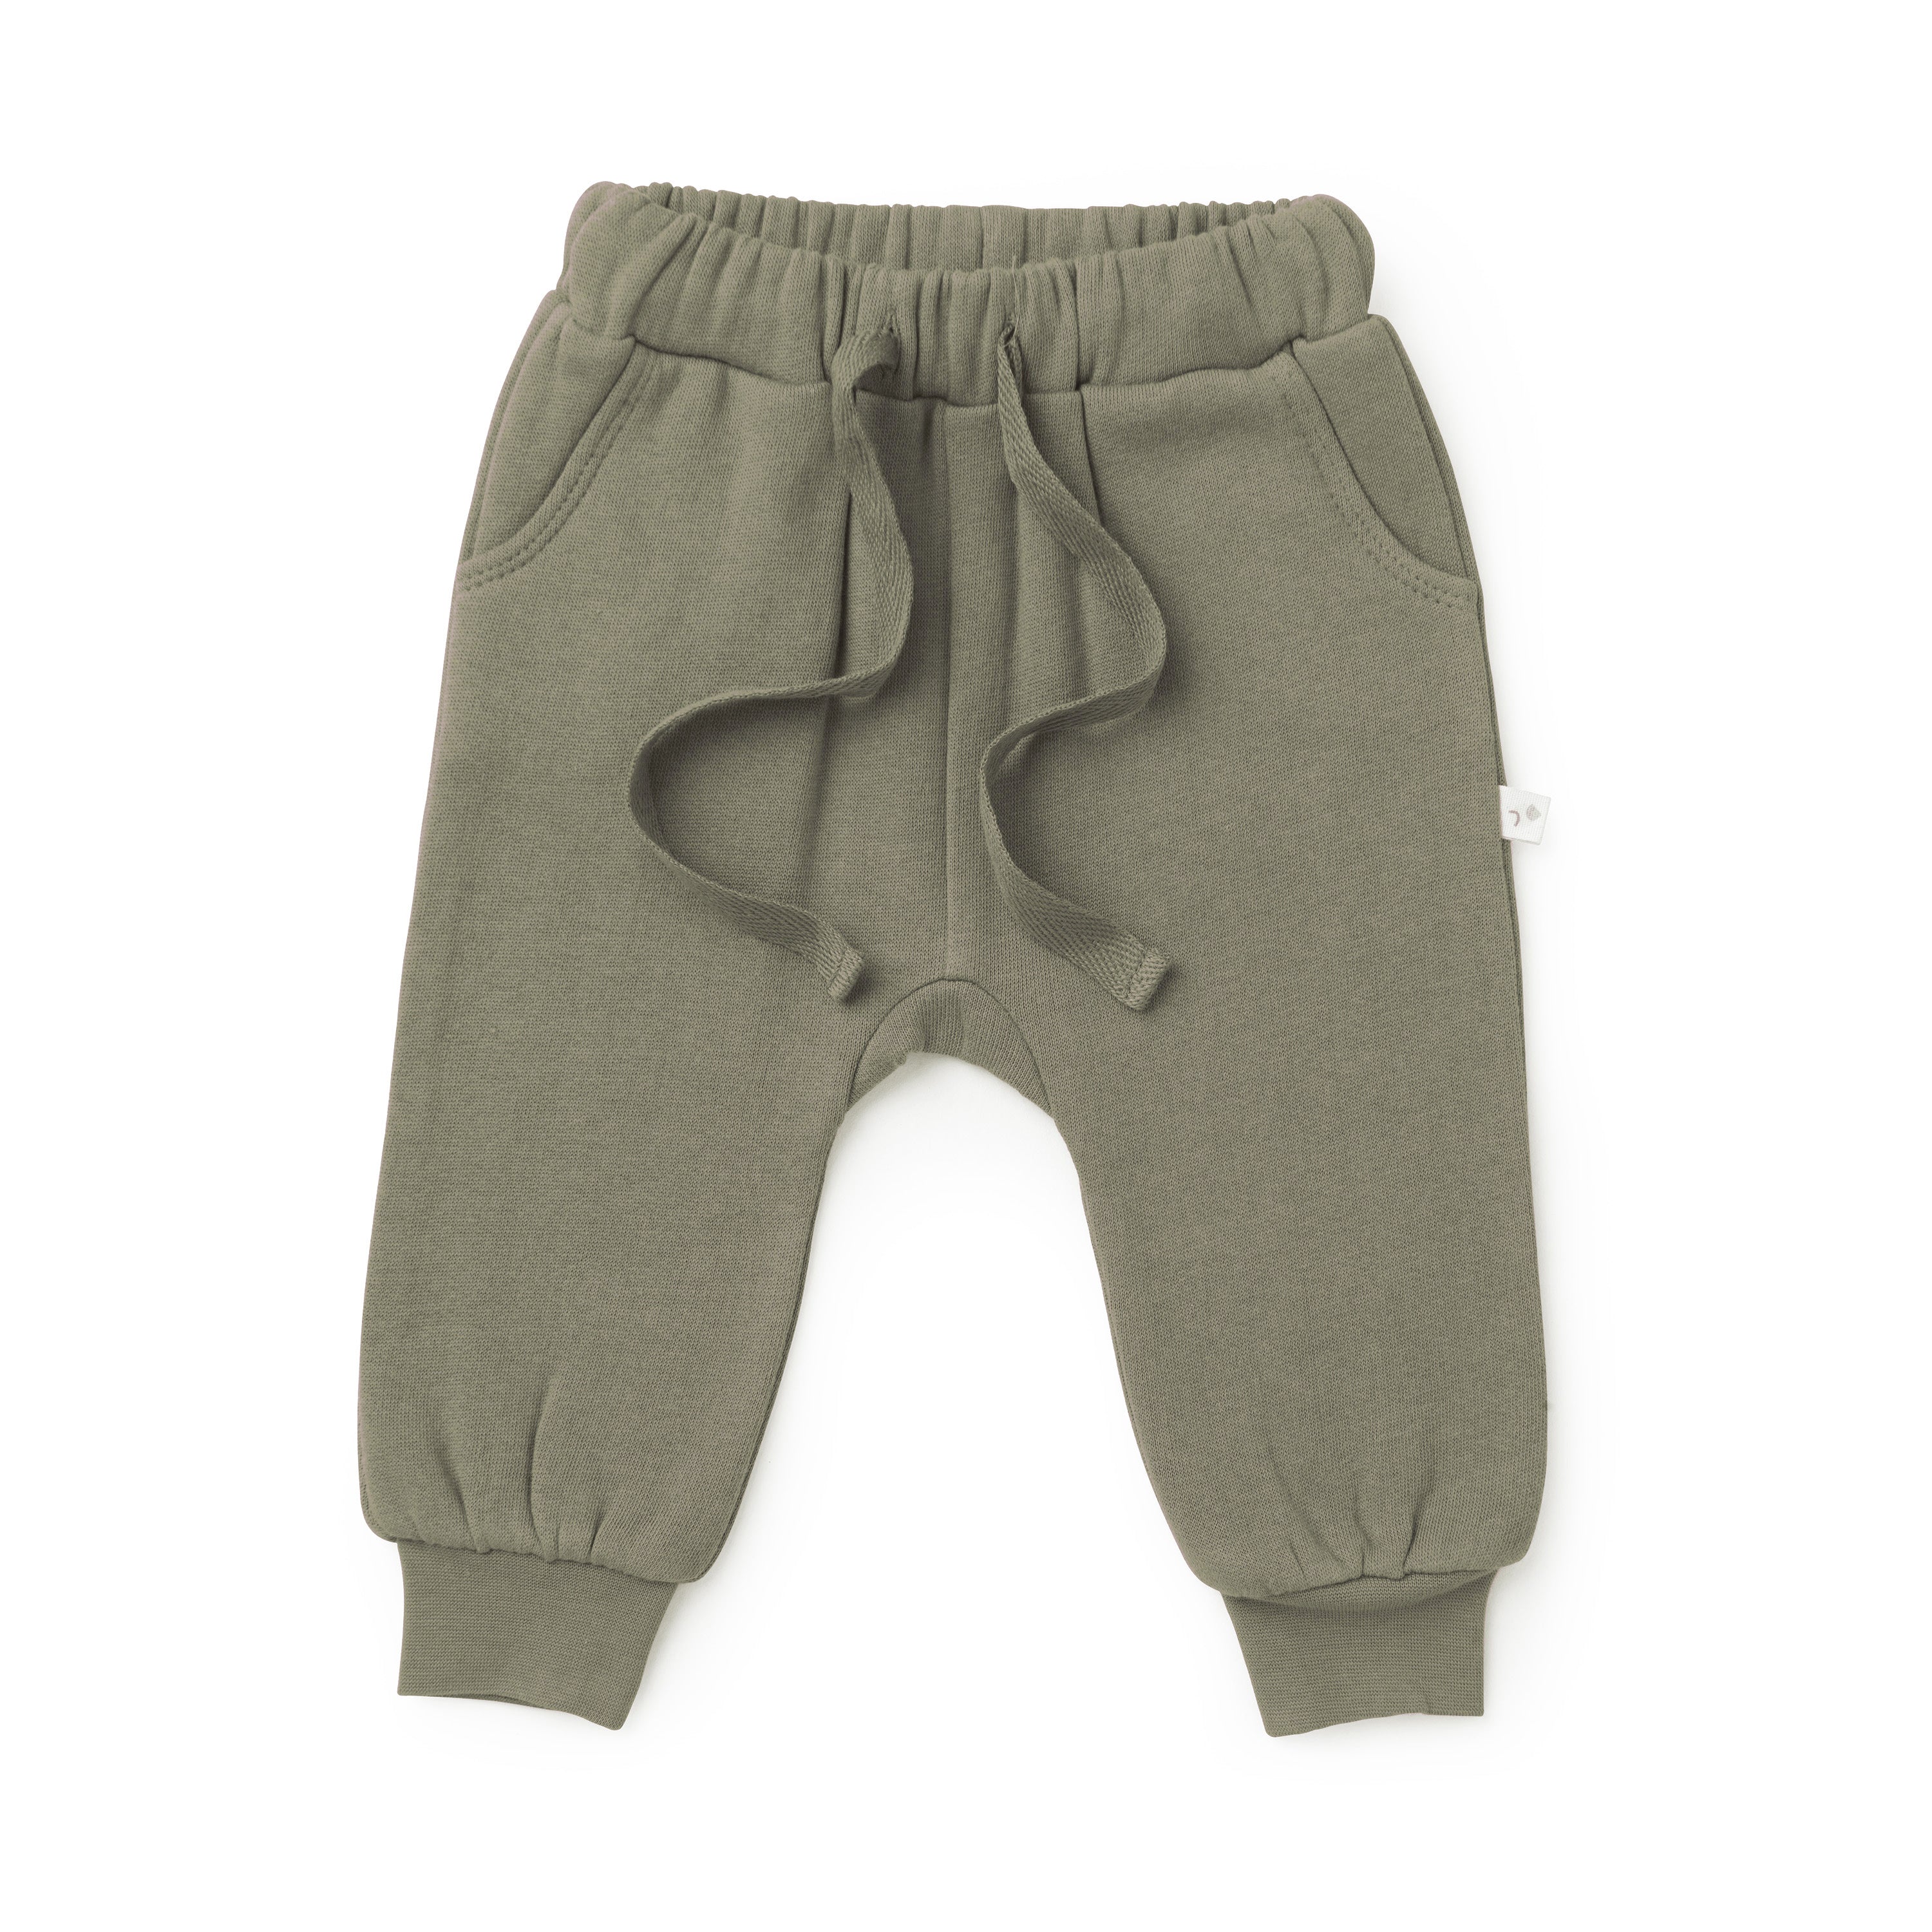 Organic Baby olive green jogger pants with a drawstring and cuffed ankles, displayed on a white background.